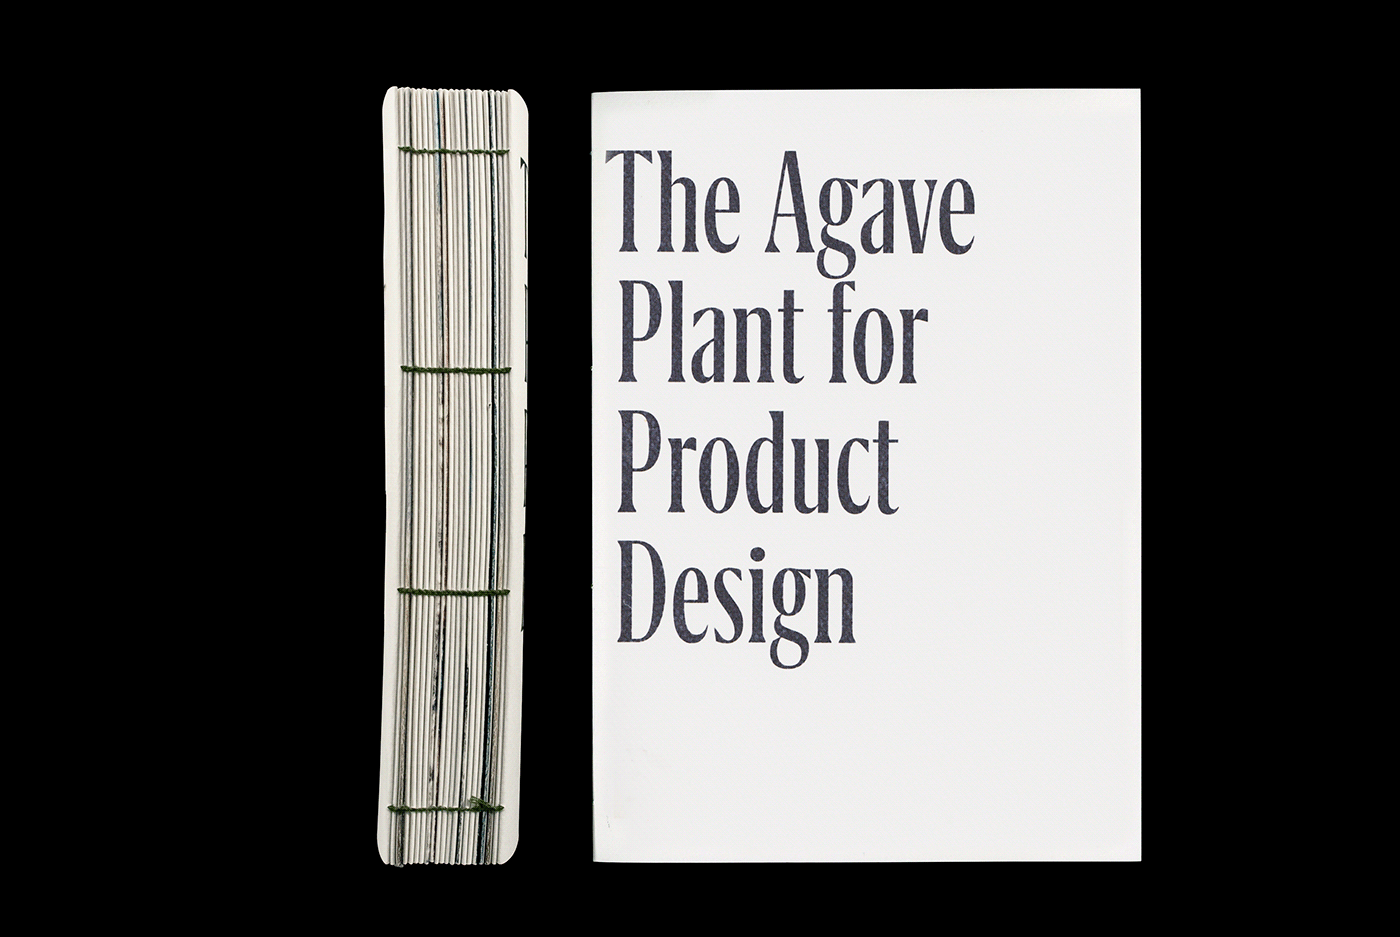 Product Page screen design idea #350: The Agave Plant for Product Design